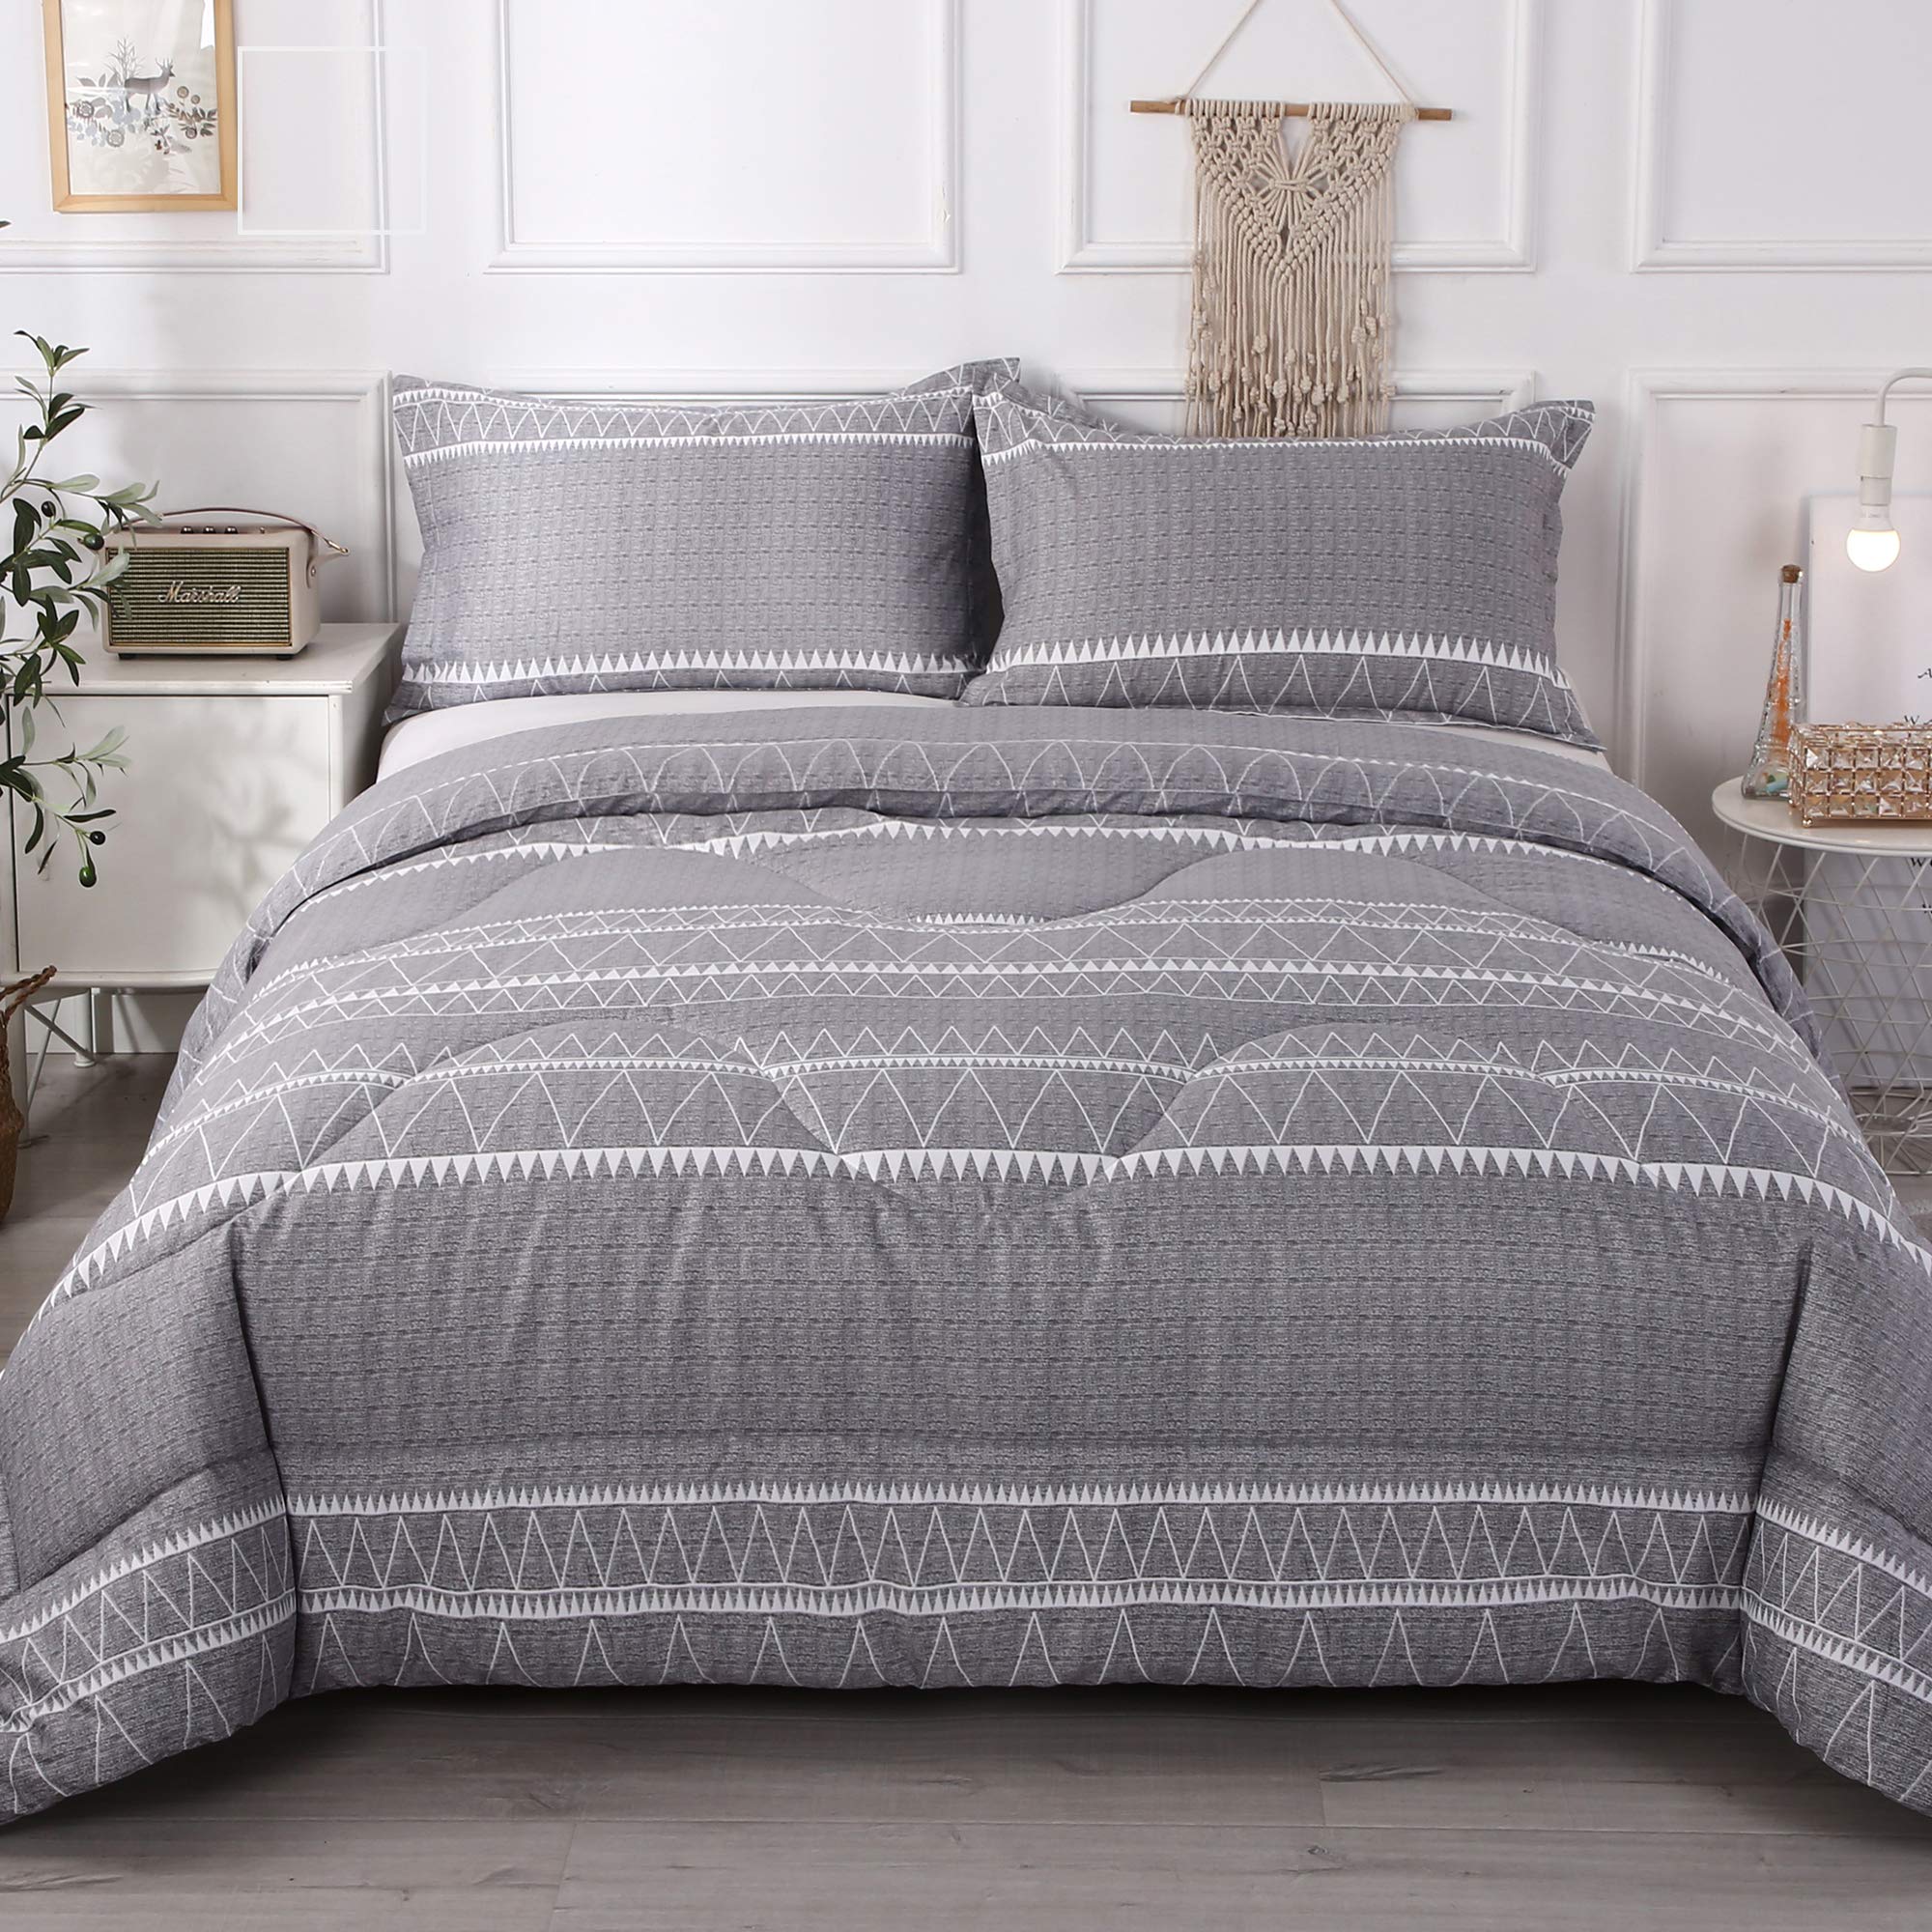 Andency Grey Boho Comforter Queen(90x90 Inch), 3 Pieces (1 Triangle Geometric Striped Comforter+2 Pillowcases), Soft Microfiber Gray Bohemian Down ...